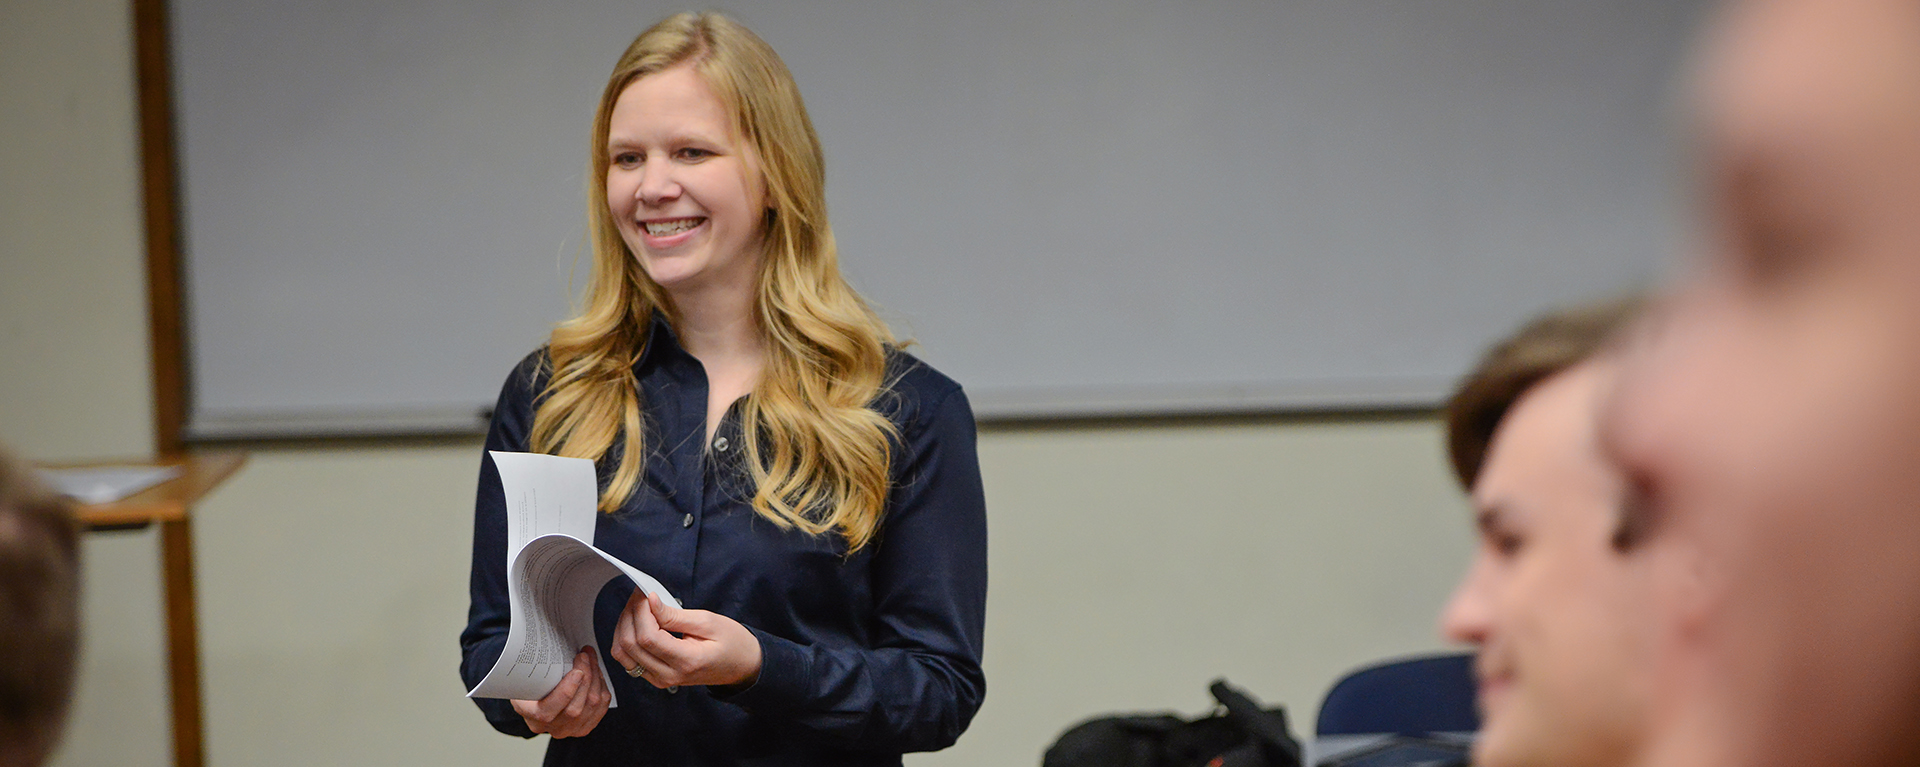 Blonde woman smiles while holding papers in front of classroom